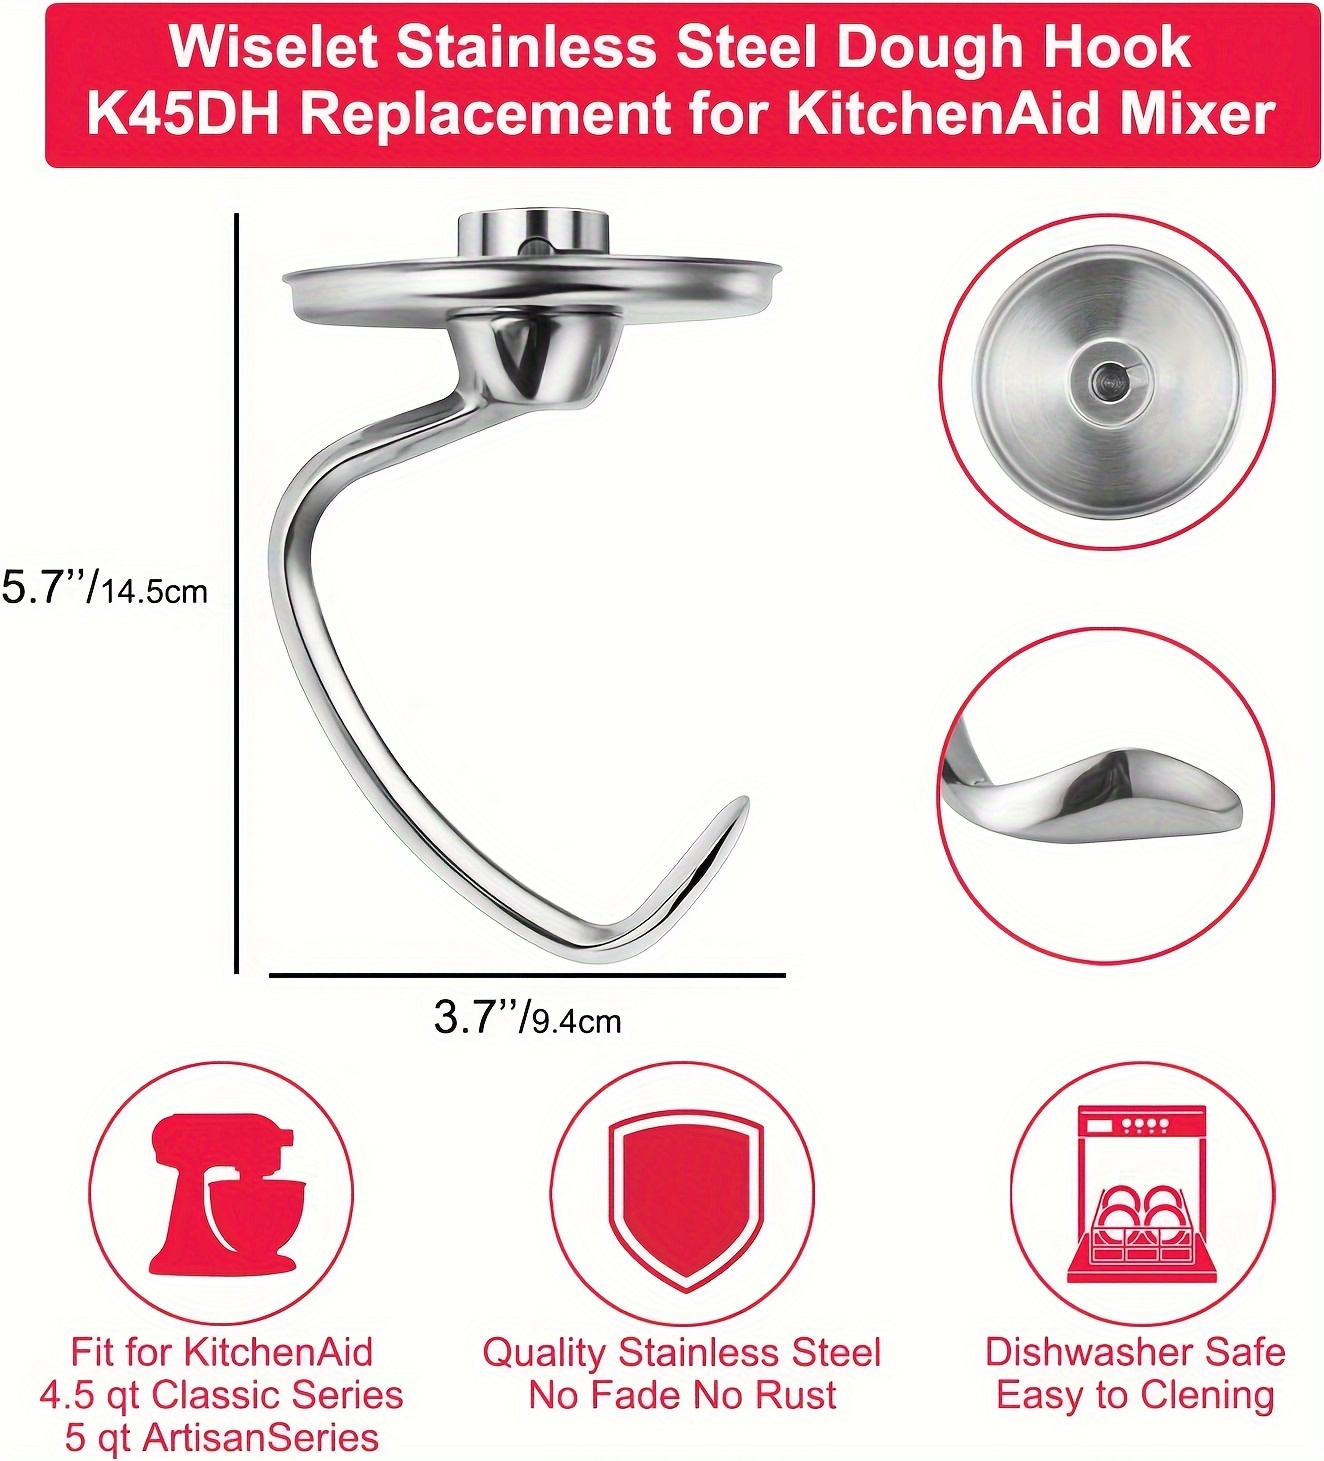 Stainless Steel Dough Hook Attachment for KitchenAid 4.5-5 Quart